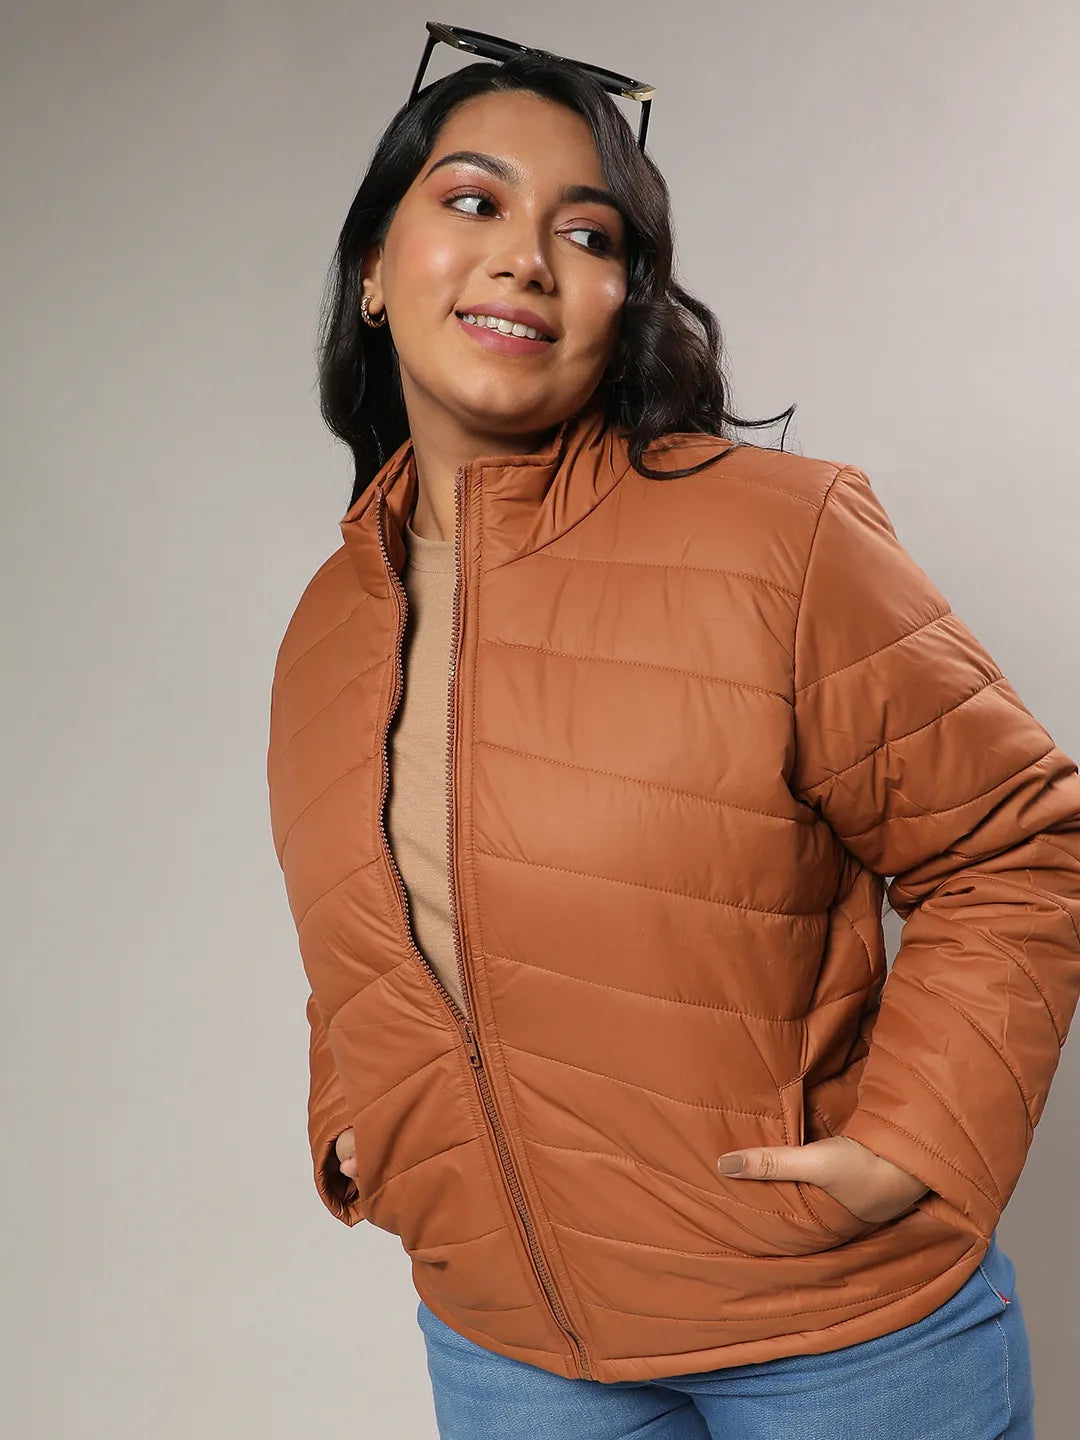 Tan Brown Quilted Puffer Jacket With Zip Closure